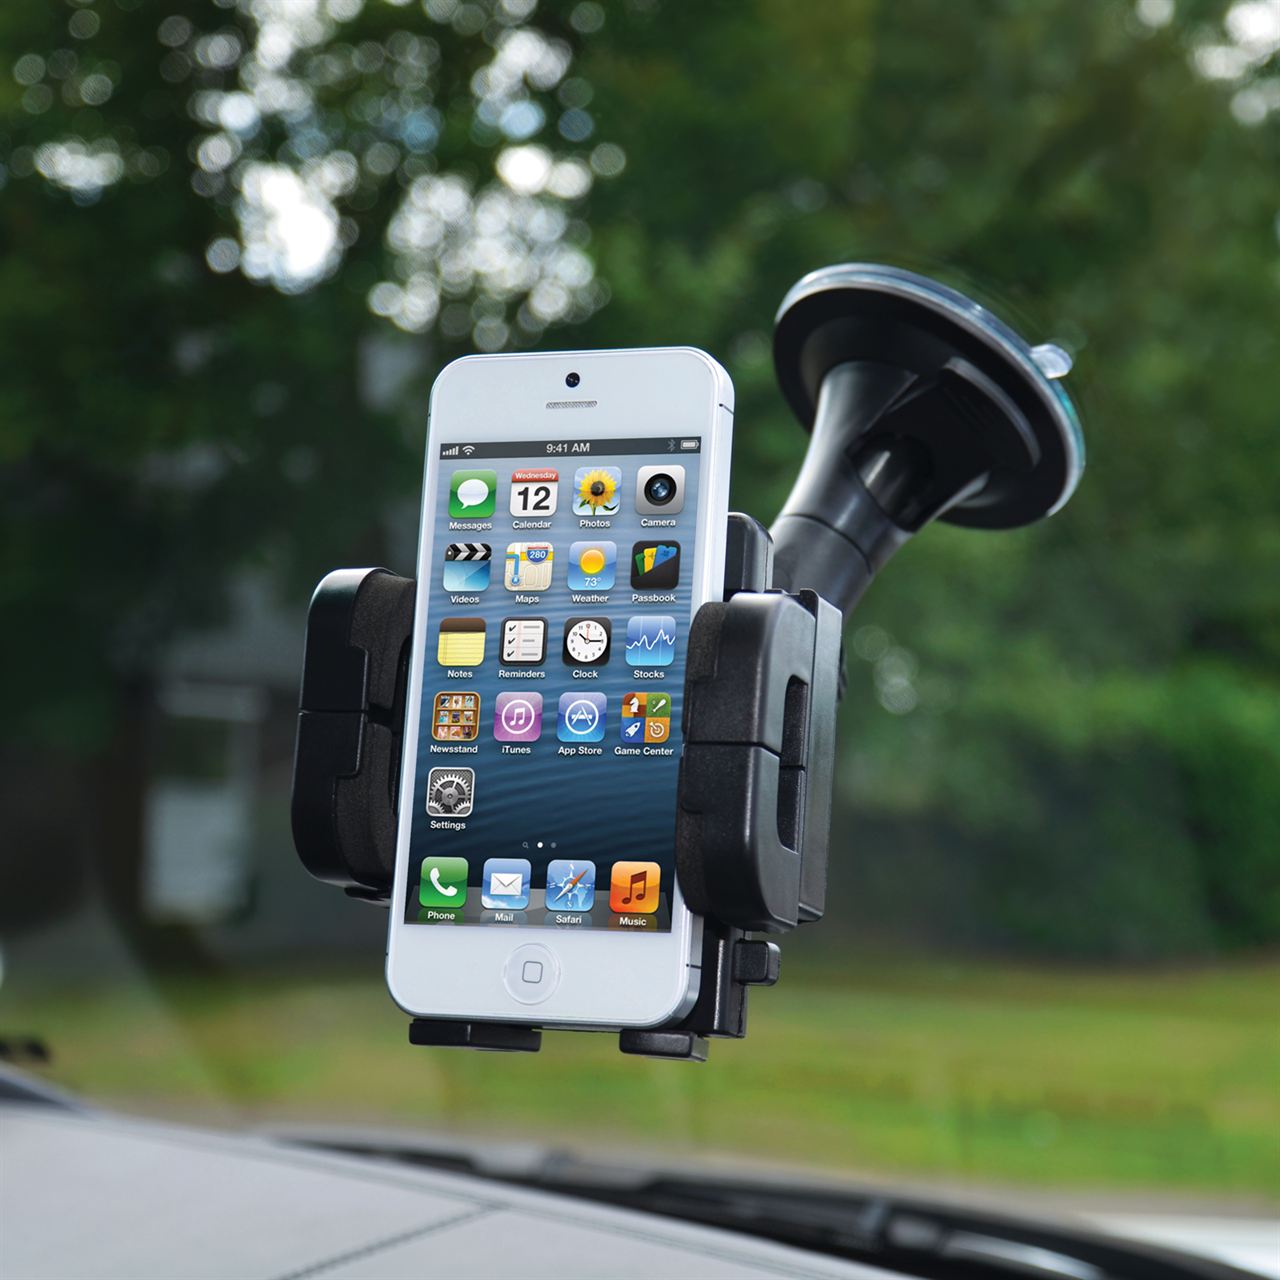 YouSave Accessories Universal Car Phone Holder 